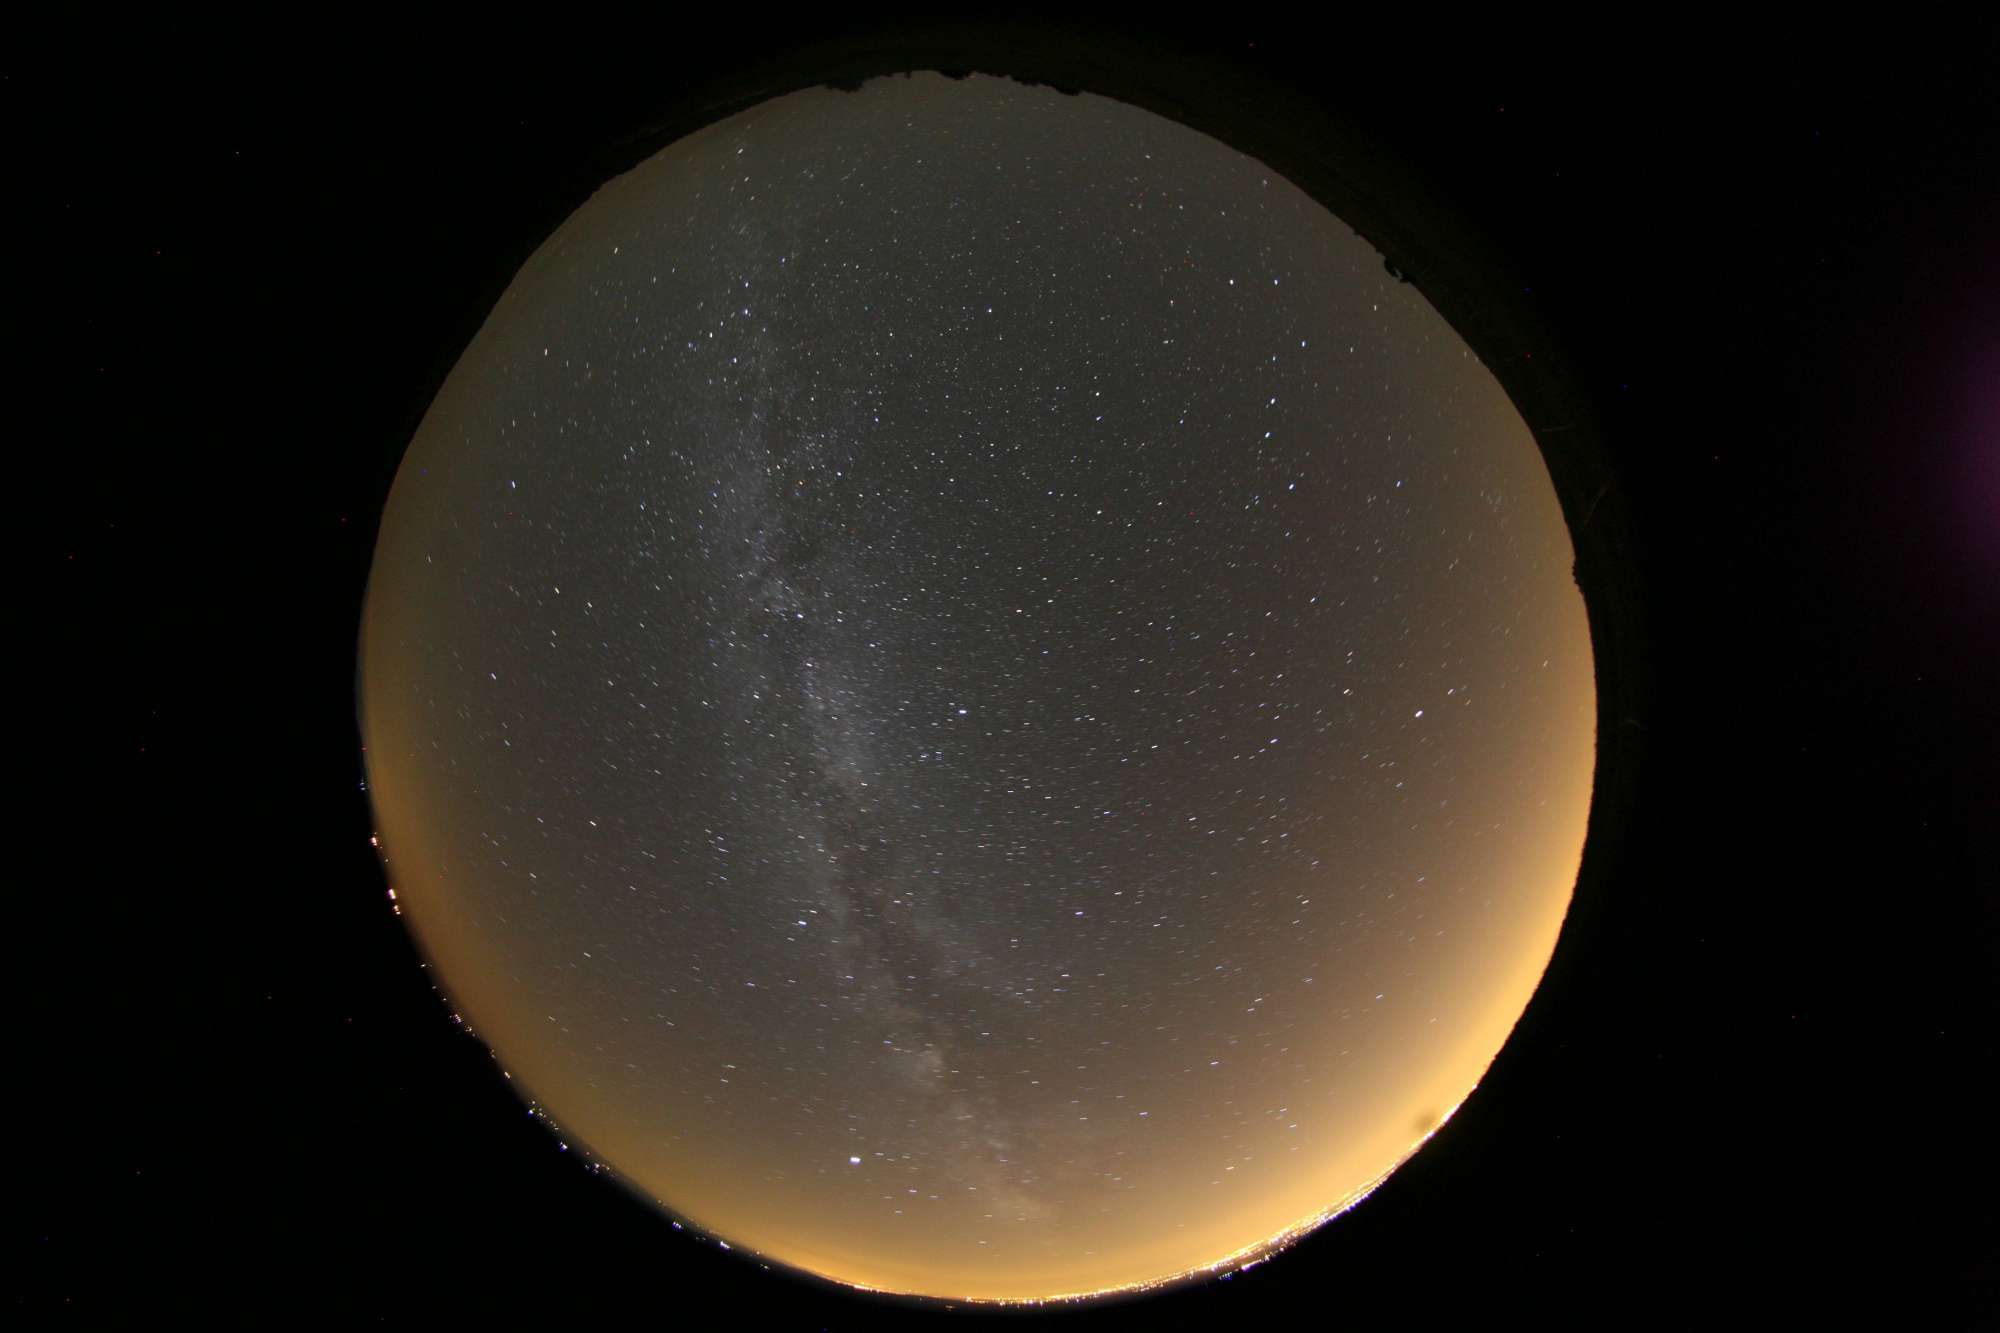 Light Pollution view by Mount Matajur: 100 KB; click on the image to enlarge